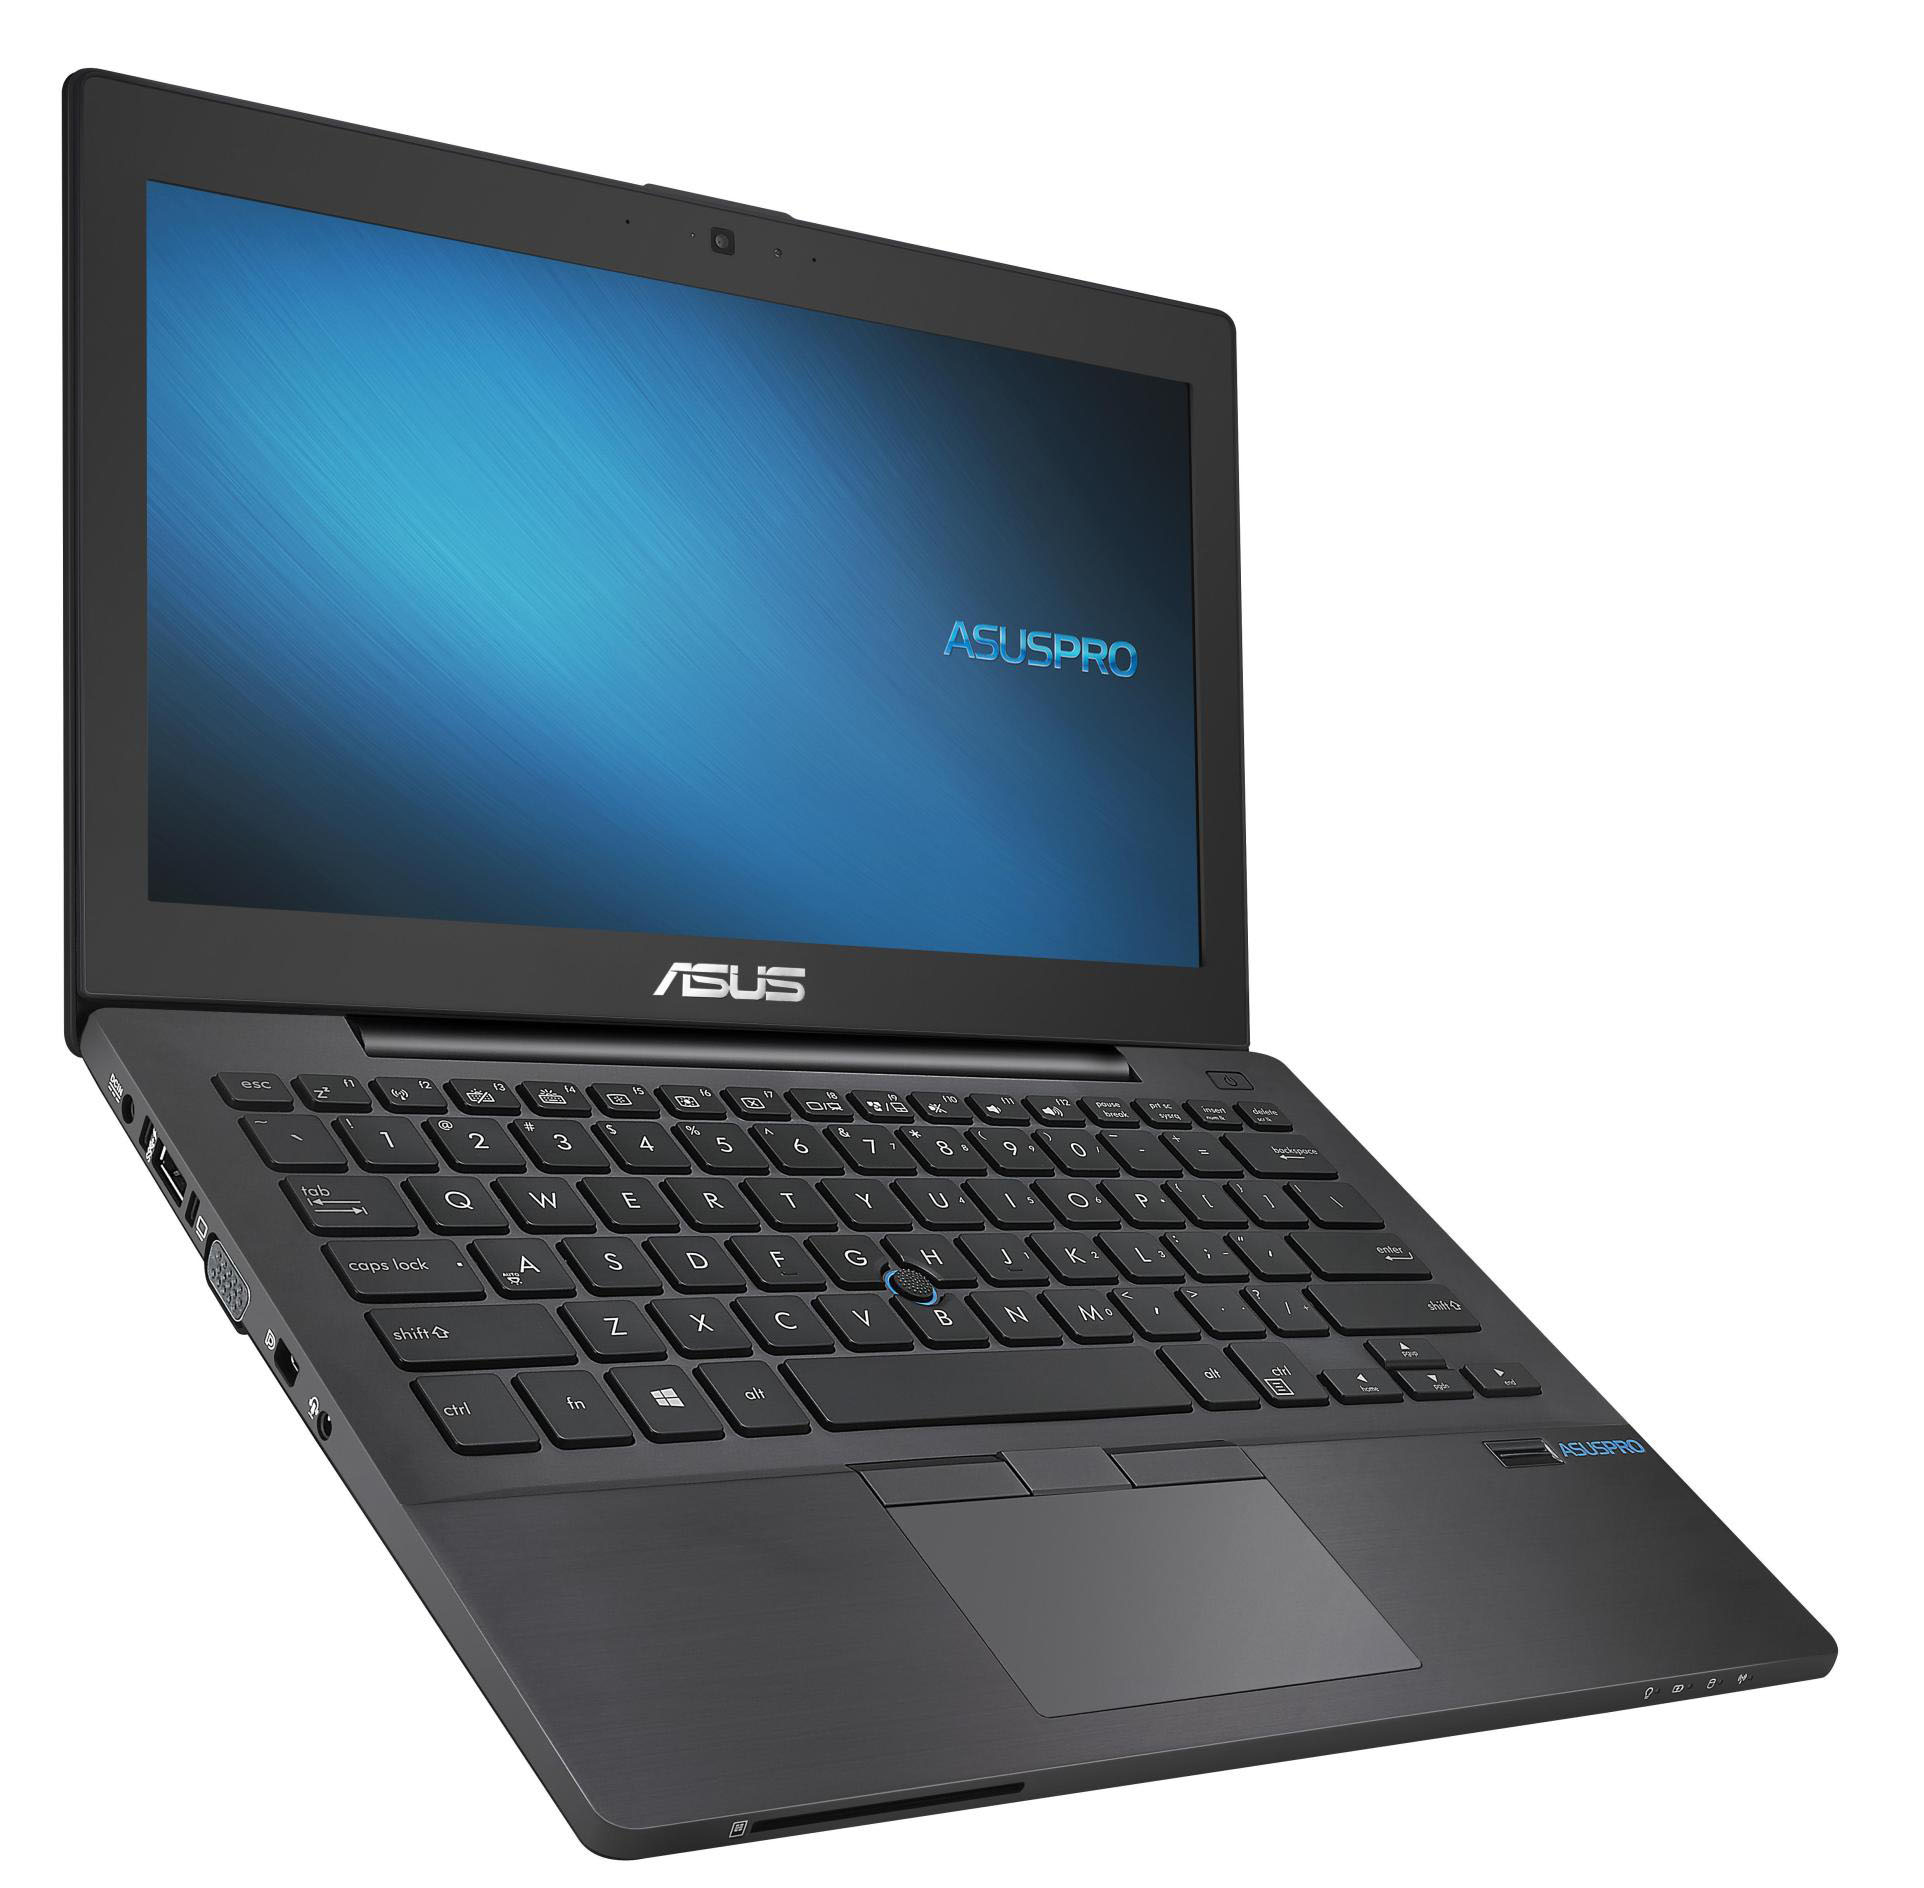 ASUS ASUSPRO B UA Specs Tests And Prices LaptopMedia Com